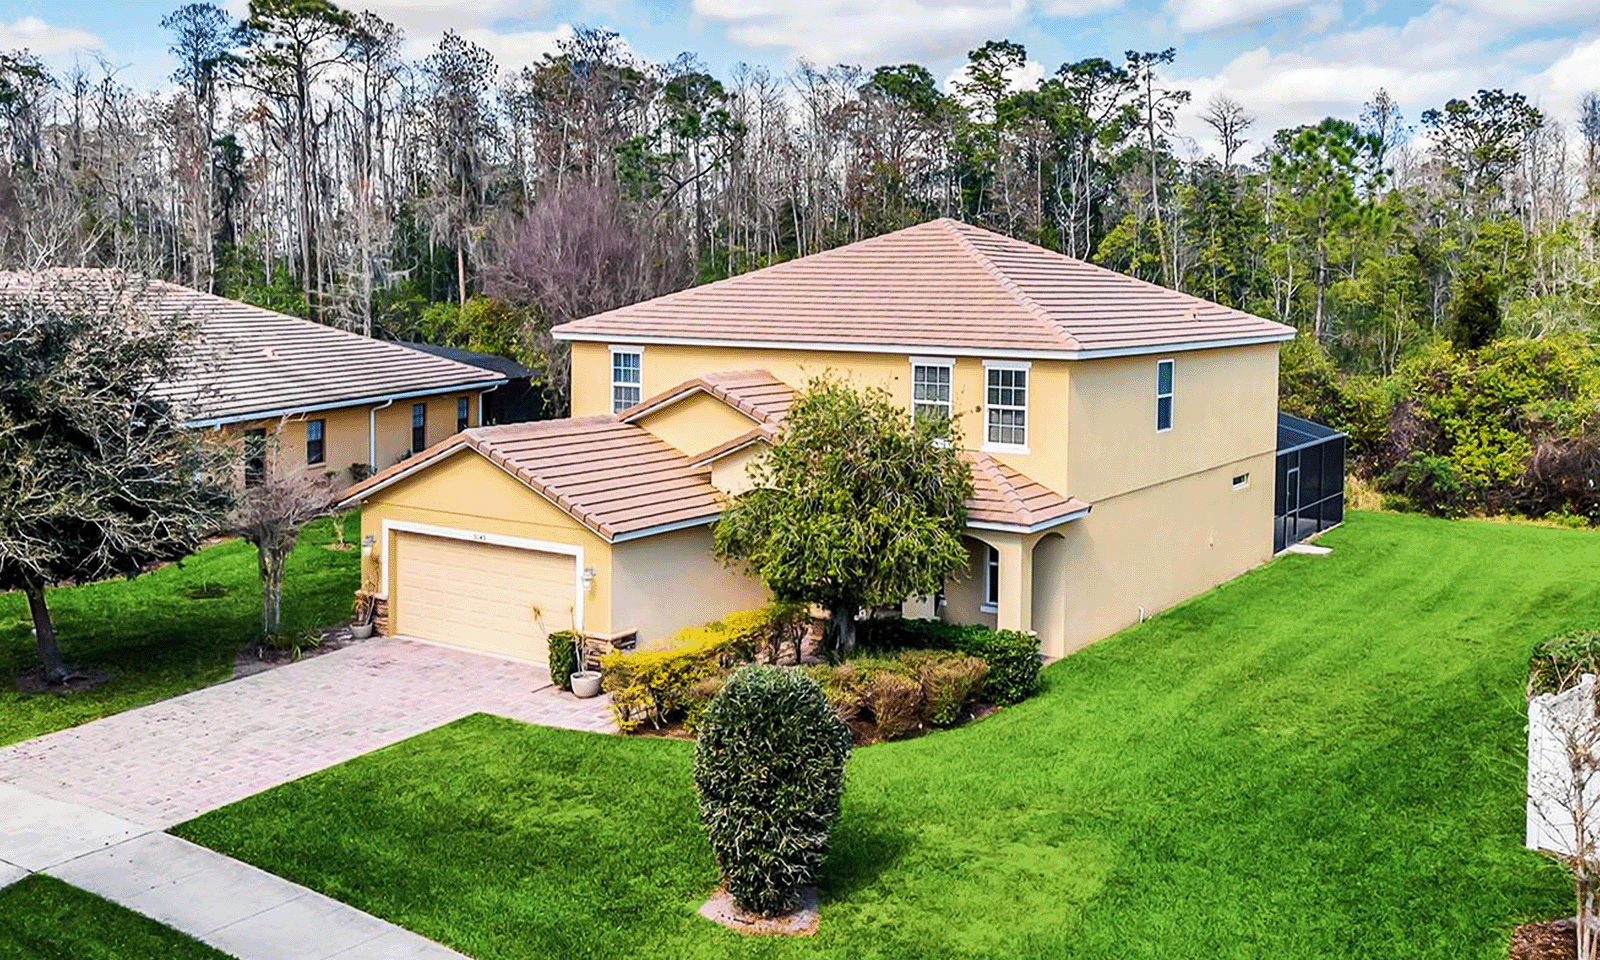 Sold detached home in Kissimmee, Florida